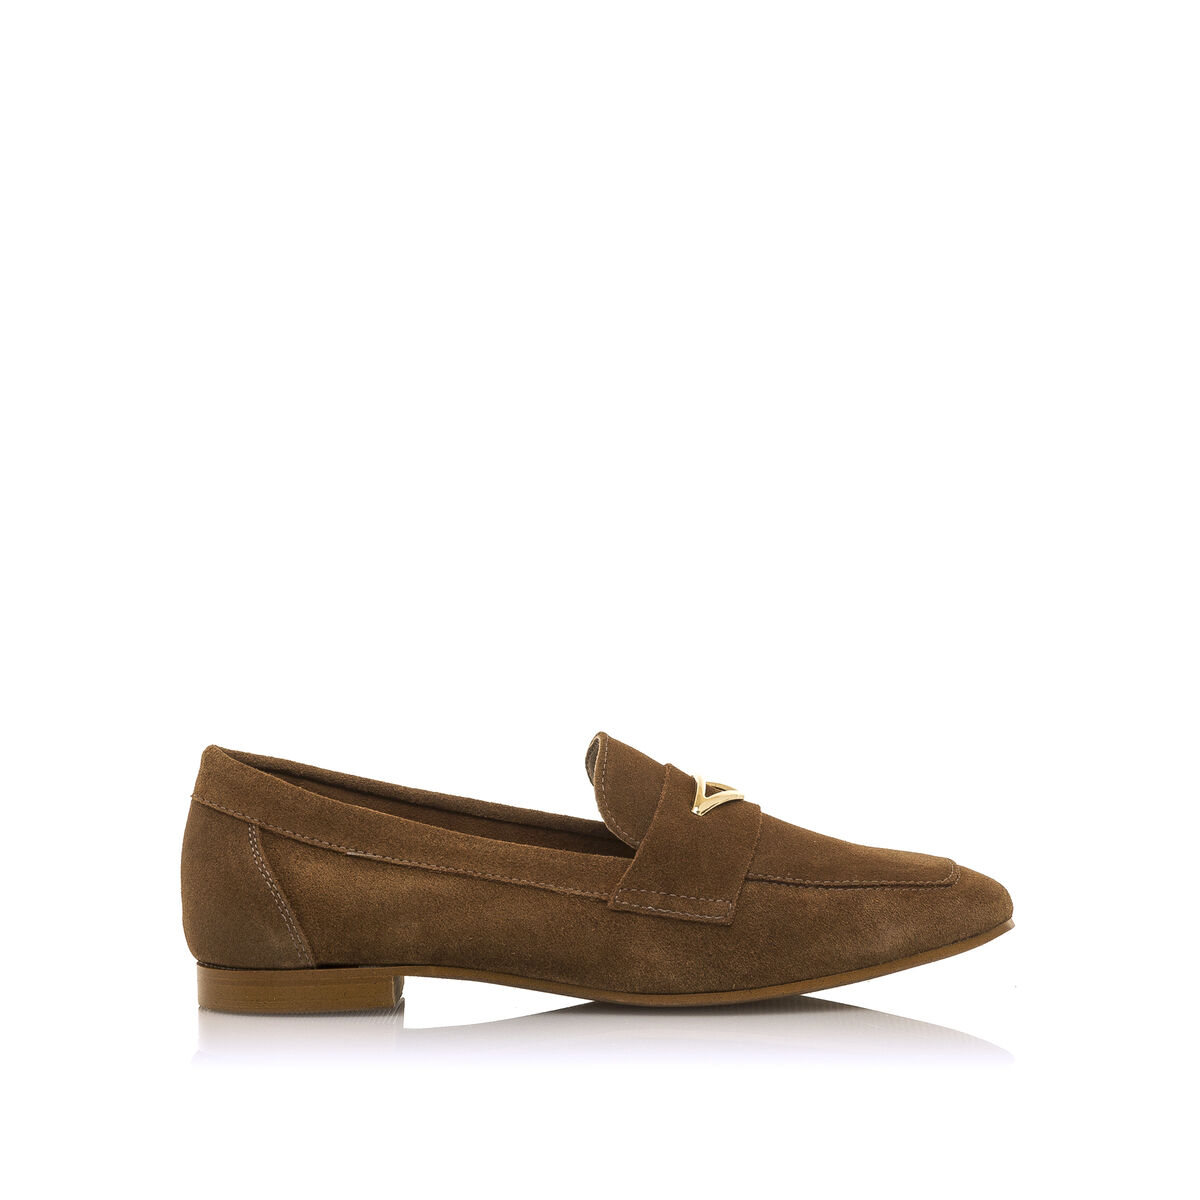 MTNG SUEDE FLAT BROWN LOAFERS